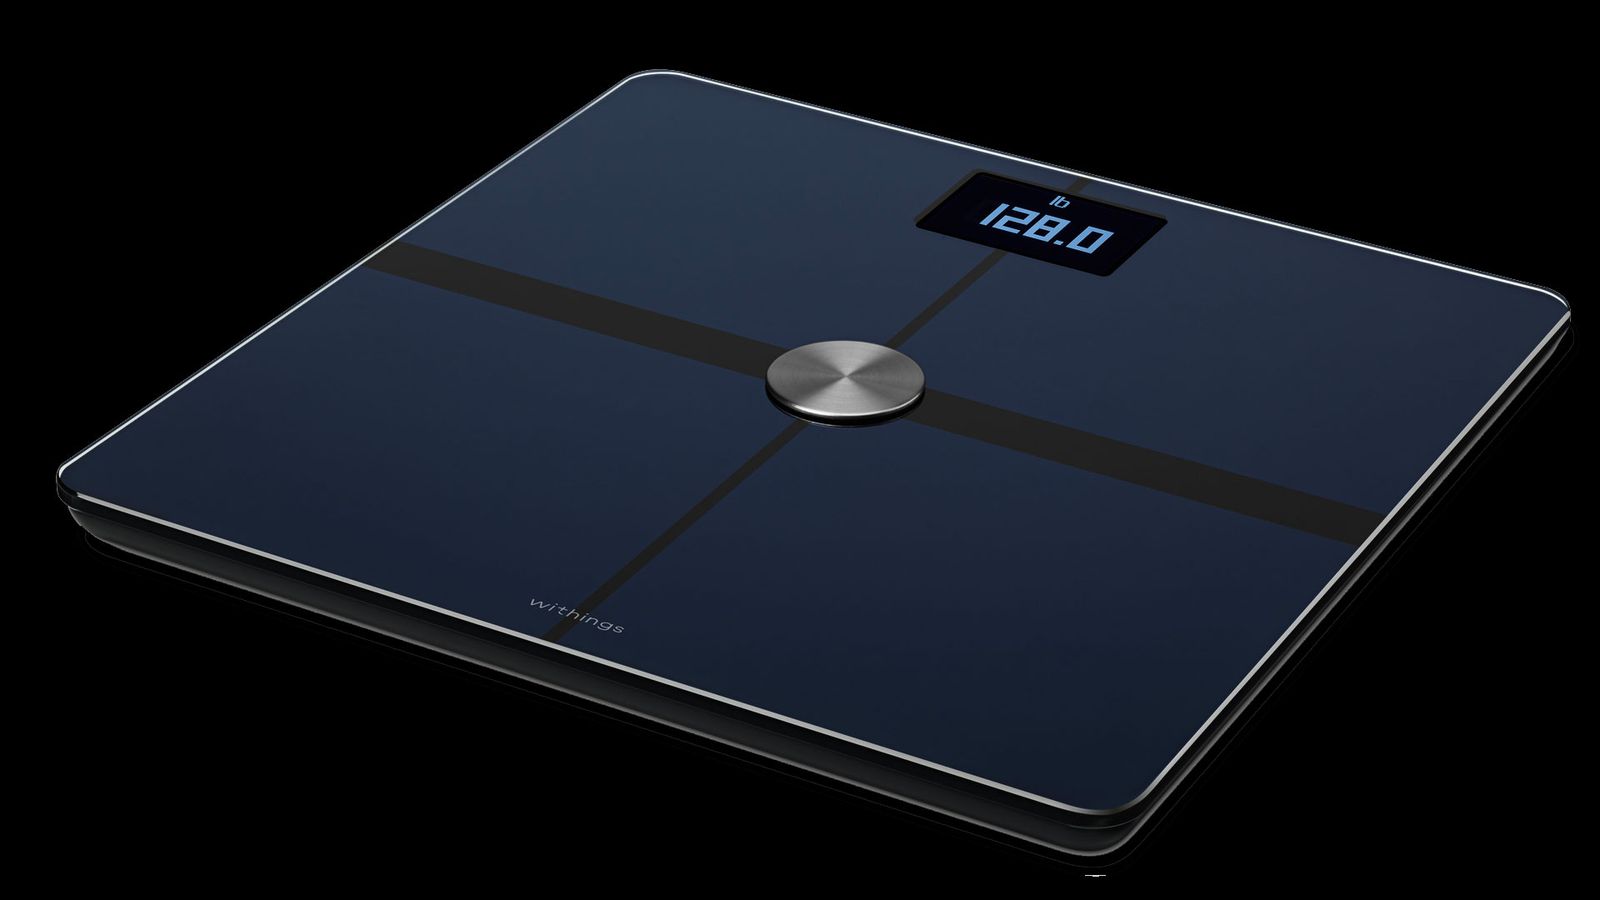 Withings Body+ product image of a black device with 128 on the digital display.